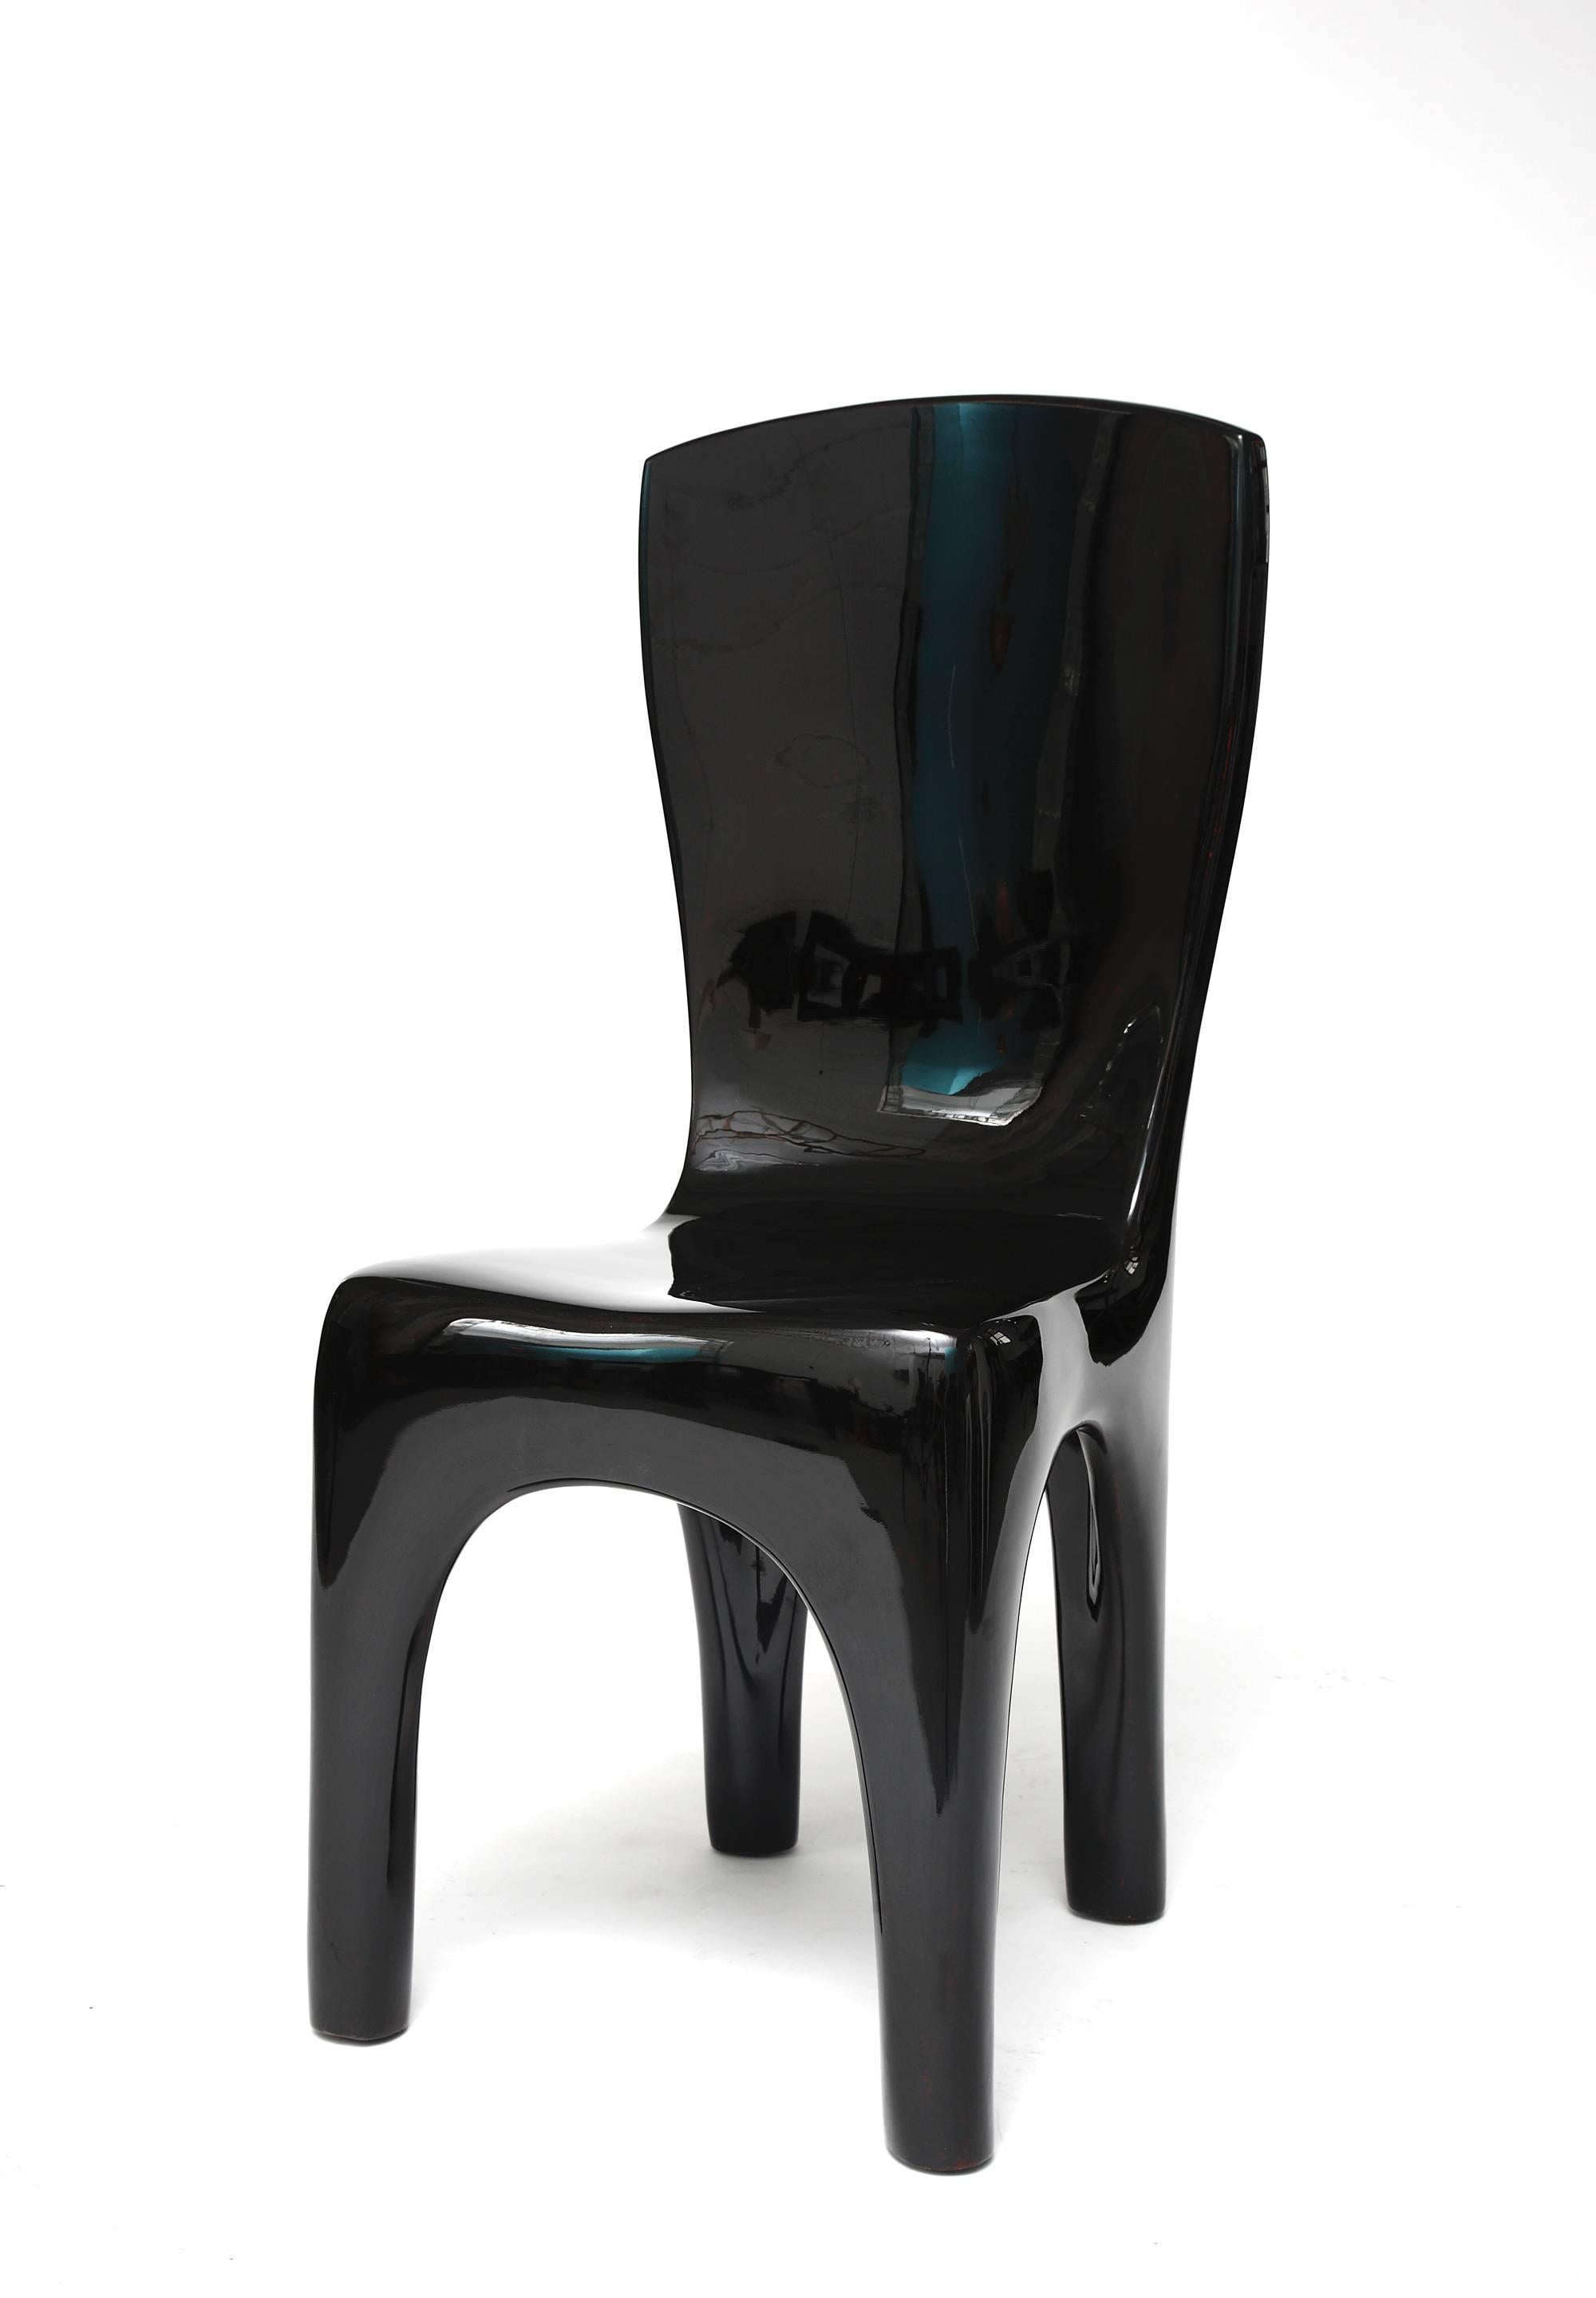 Set of sculpture dining chairs by Jacques Jarrige.

These high back chairs are finished in high end hand lacquer that reflect the surrounding space. It adds to the delicate effect of movement Jacques Jarrige's signature line provides.

Also